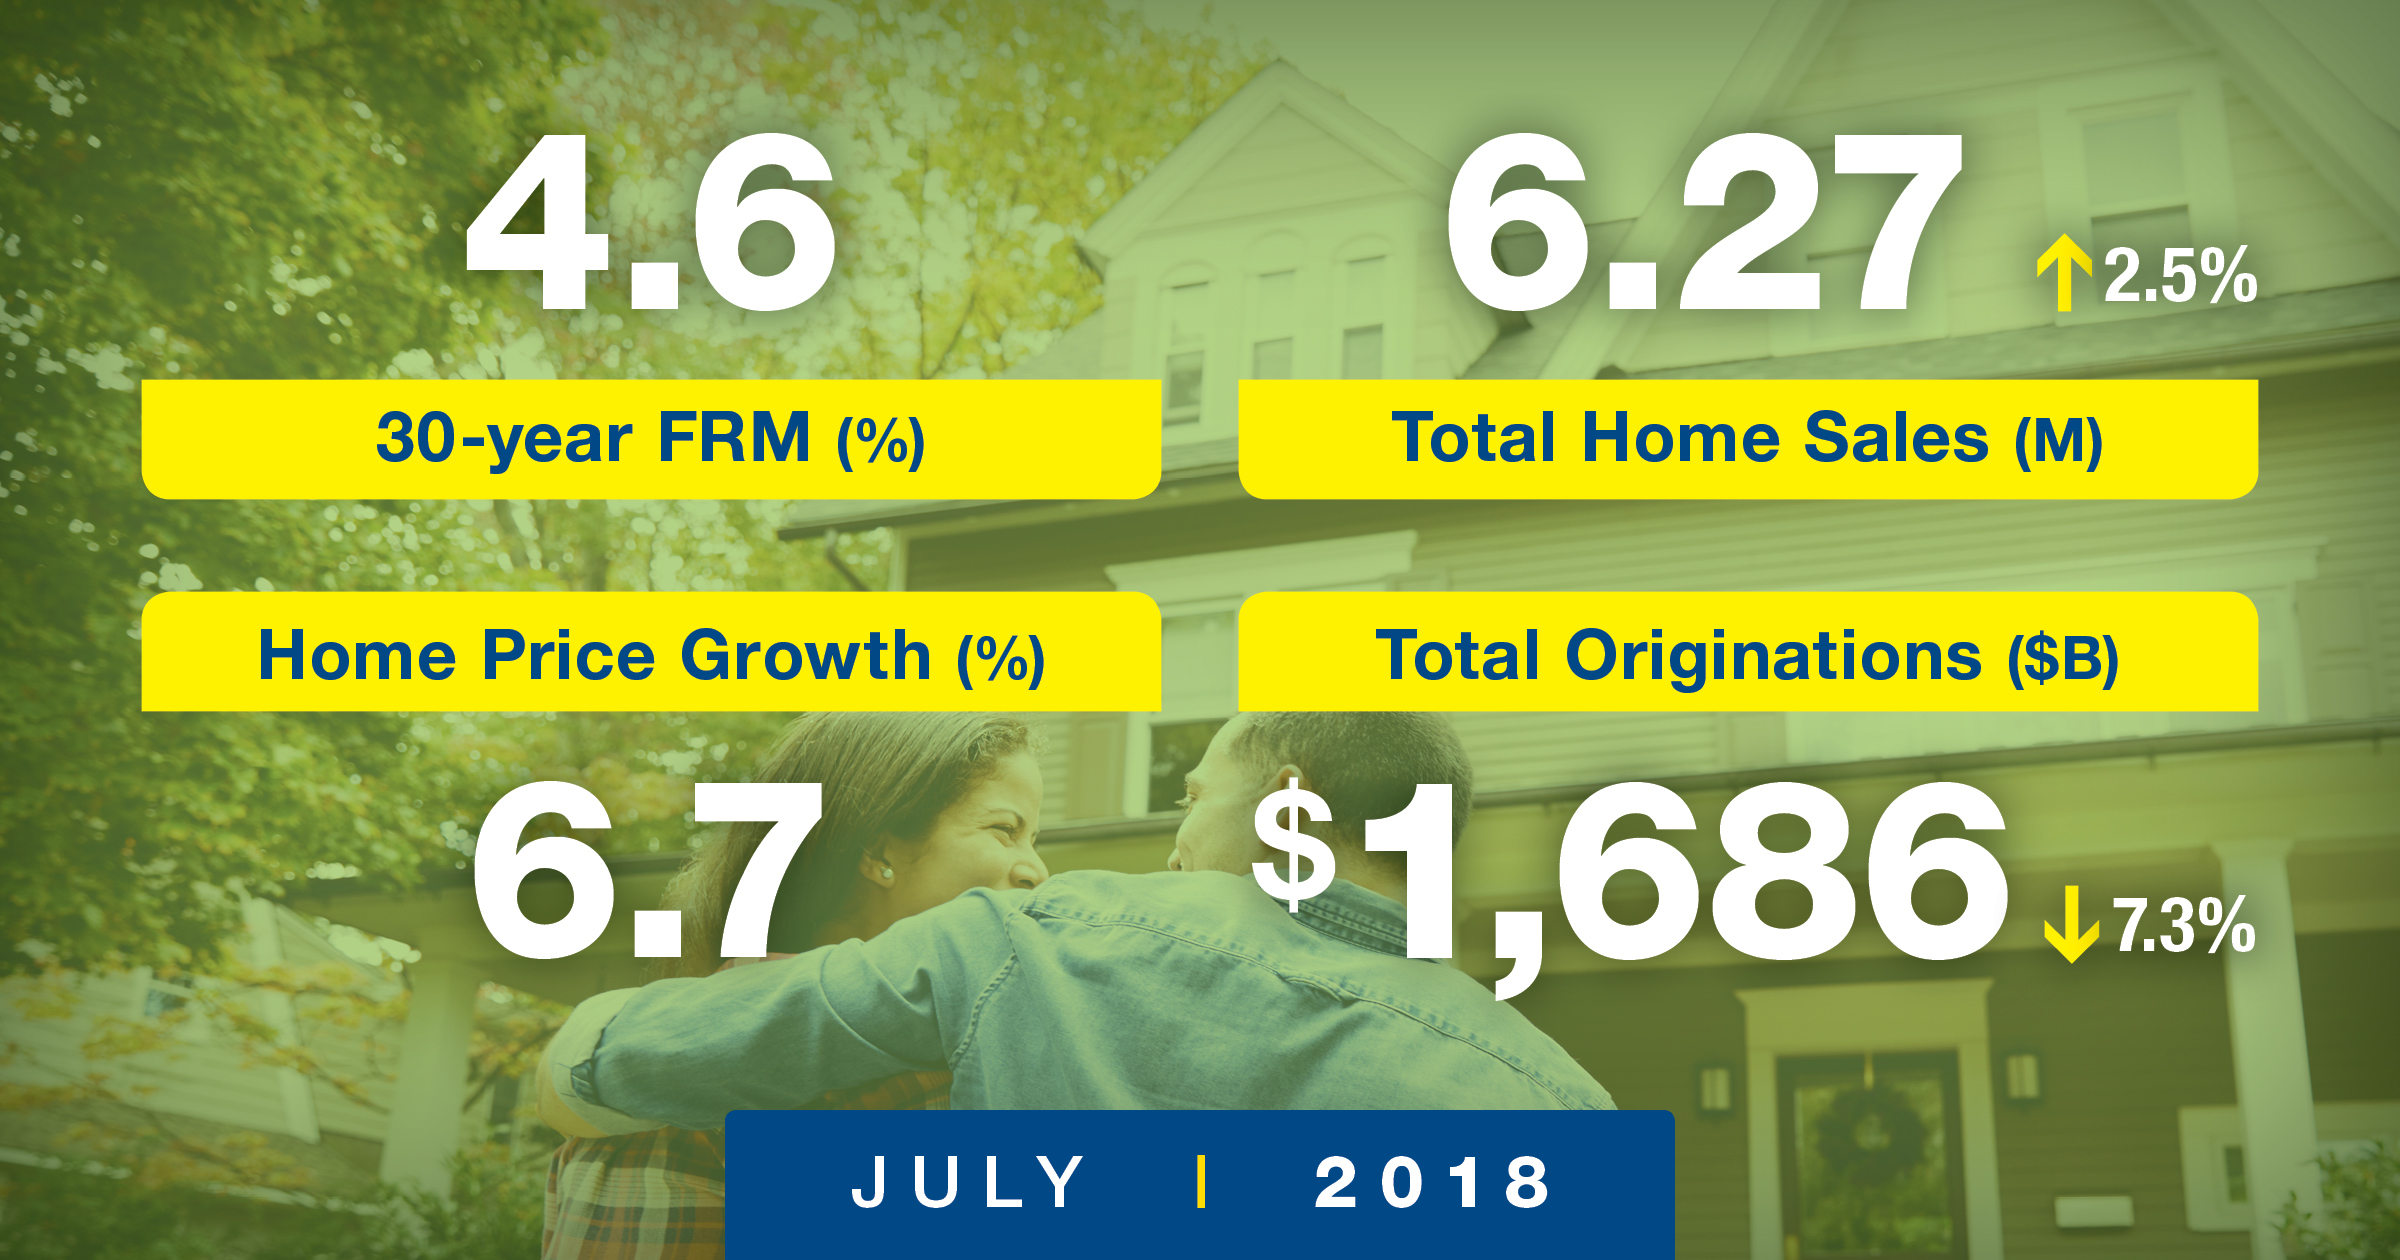 A supply and demand imbalance in housing slowed the market’s sales activity during the first half of the year, according to Freddie Mac’s July Forecast